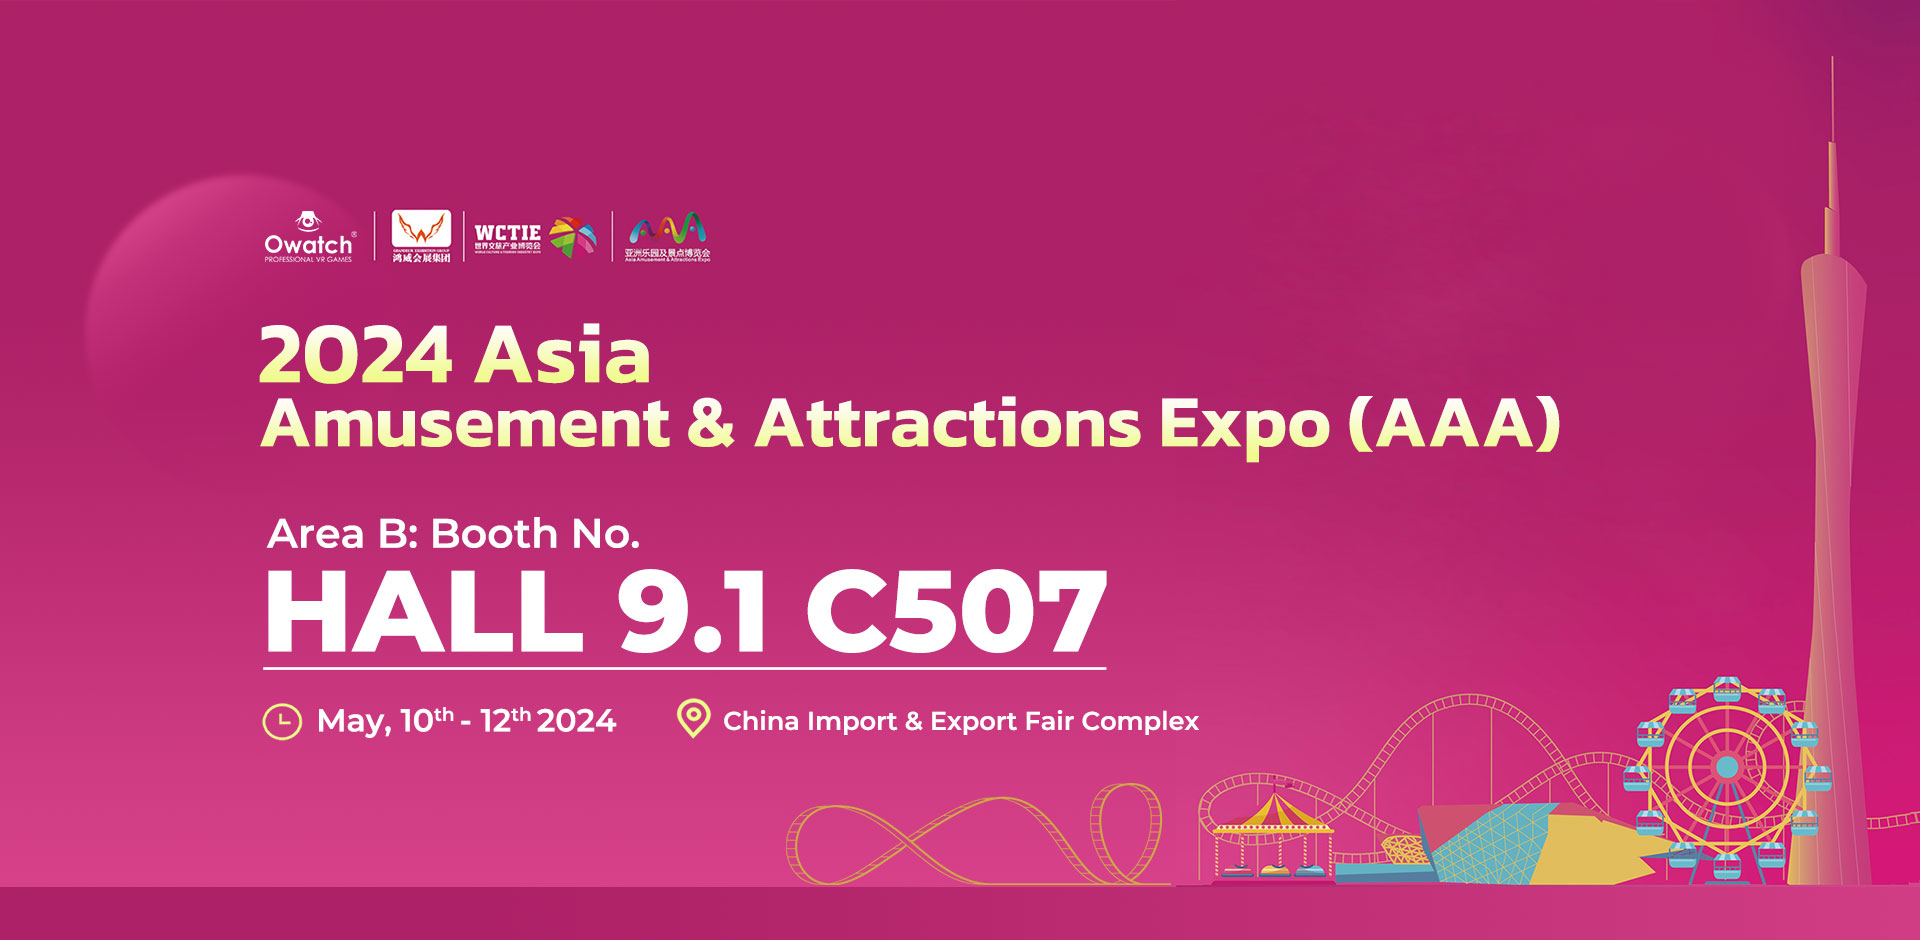 2024 Asia Amusement & Attractions Expo